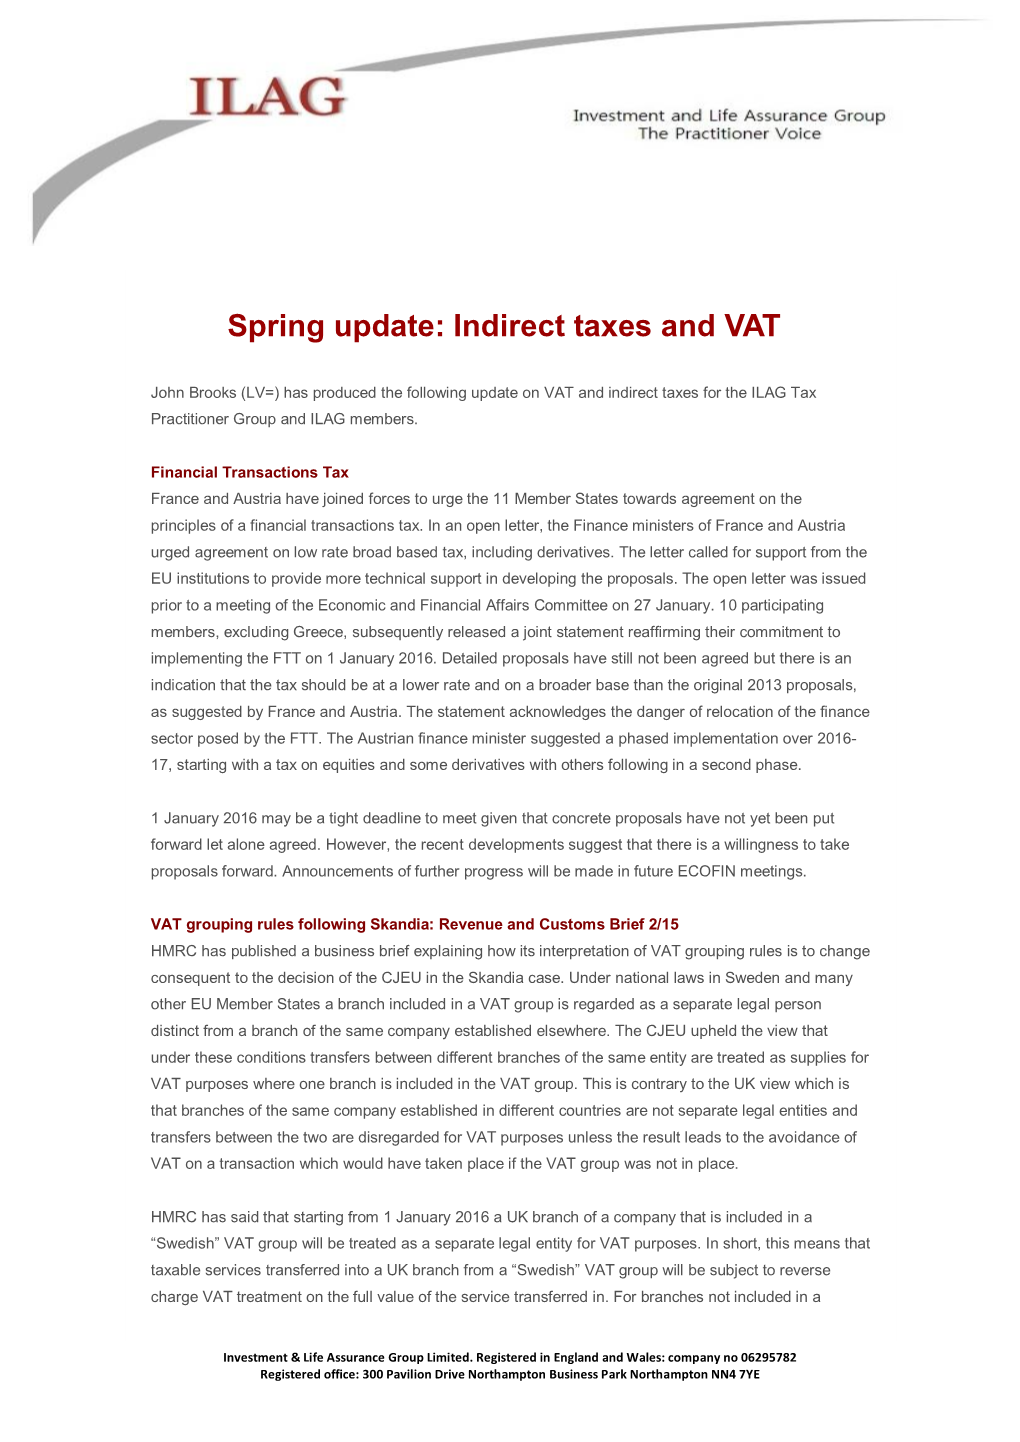 Spring Update: Indirect Taxes and VAT